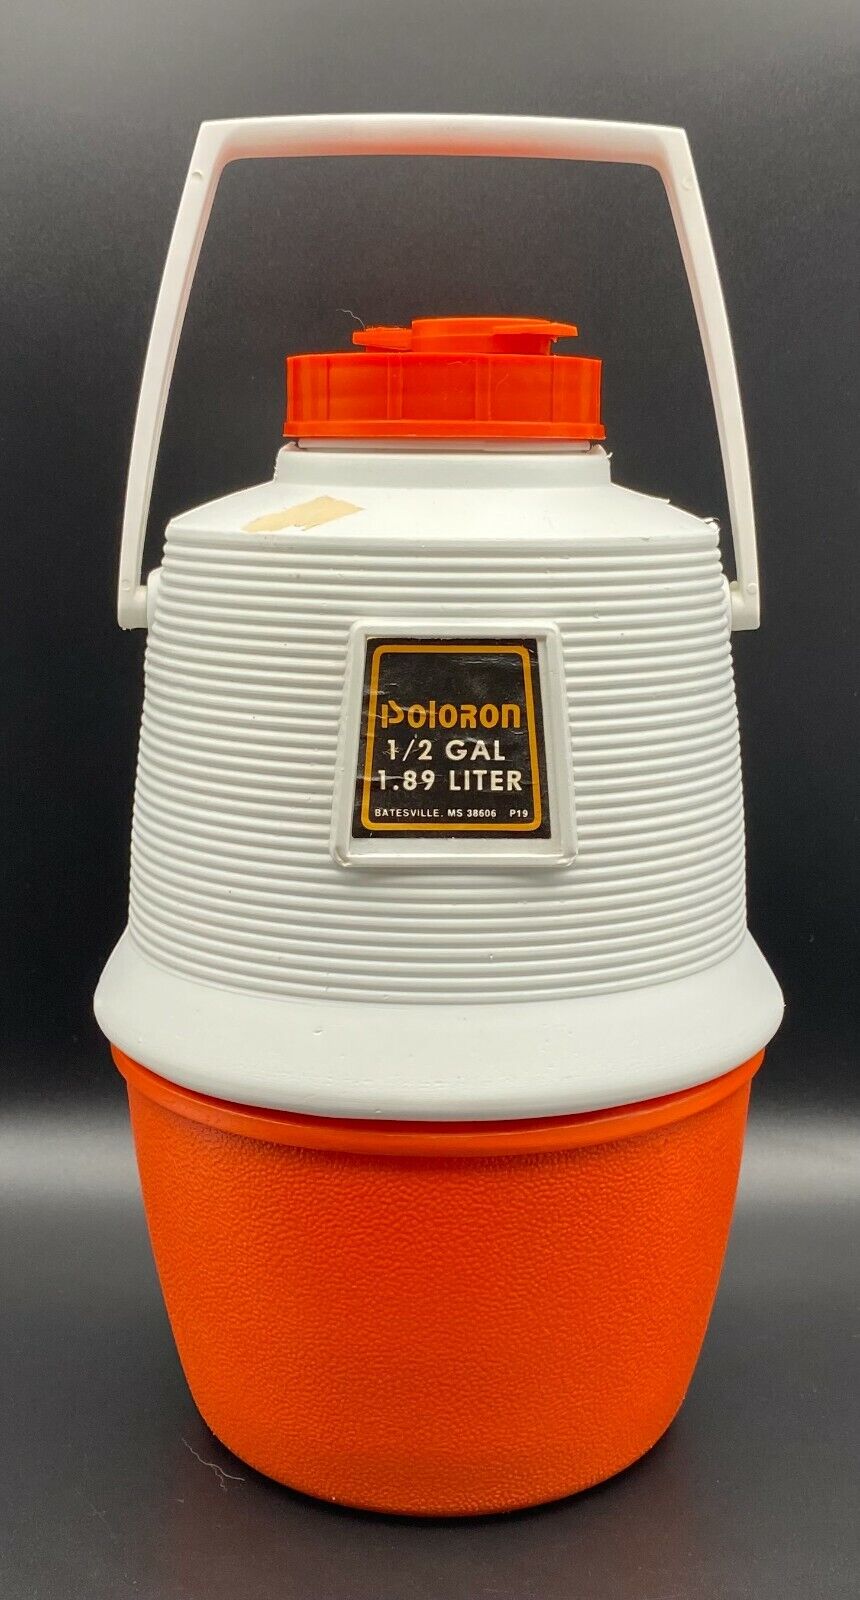 Vintage Poloron P19 Vacucel Insulated Orange 1/2 Gallon Water Jug Canister USA